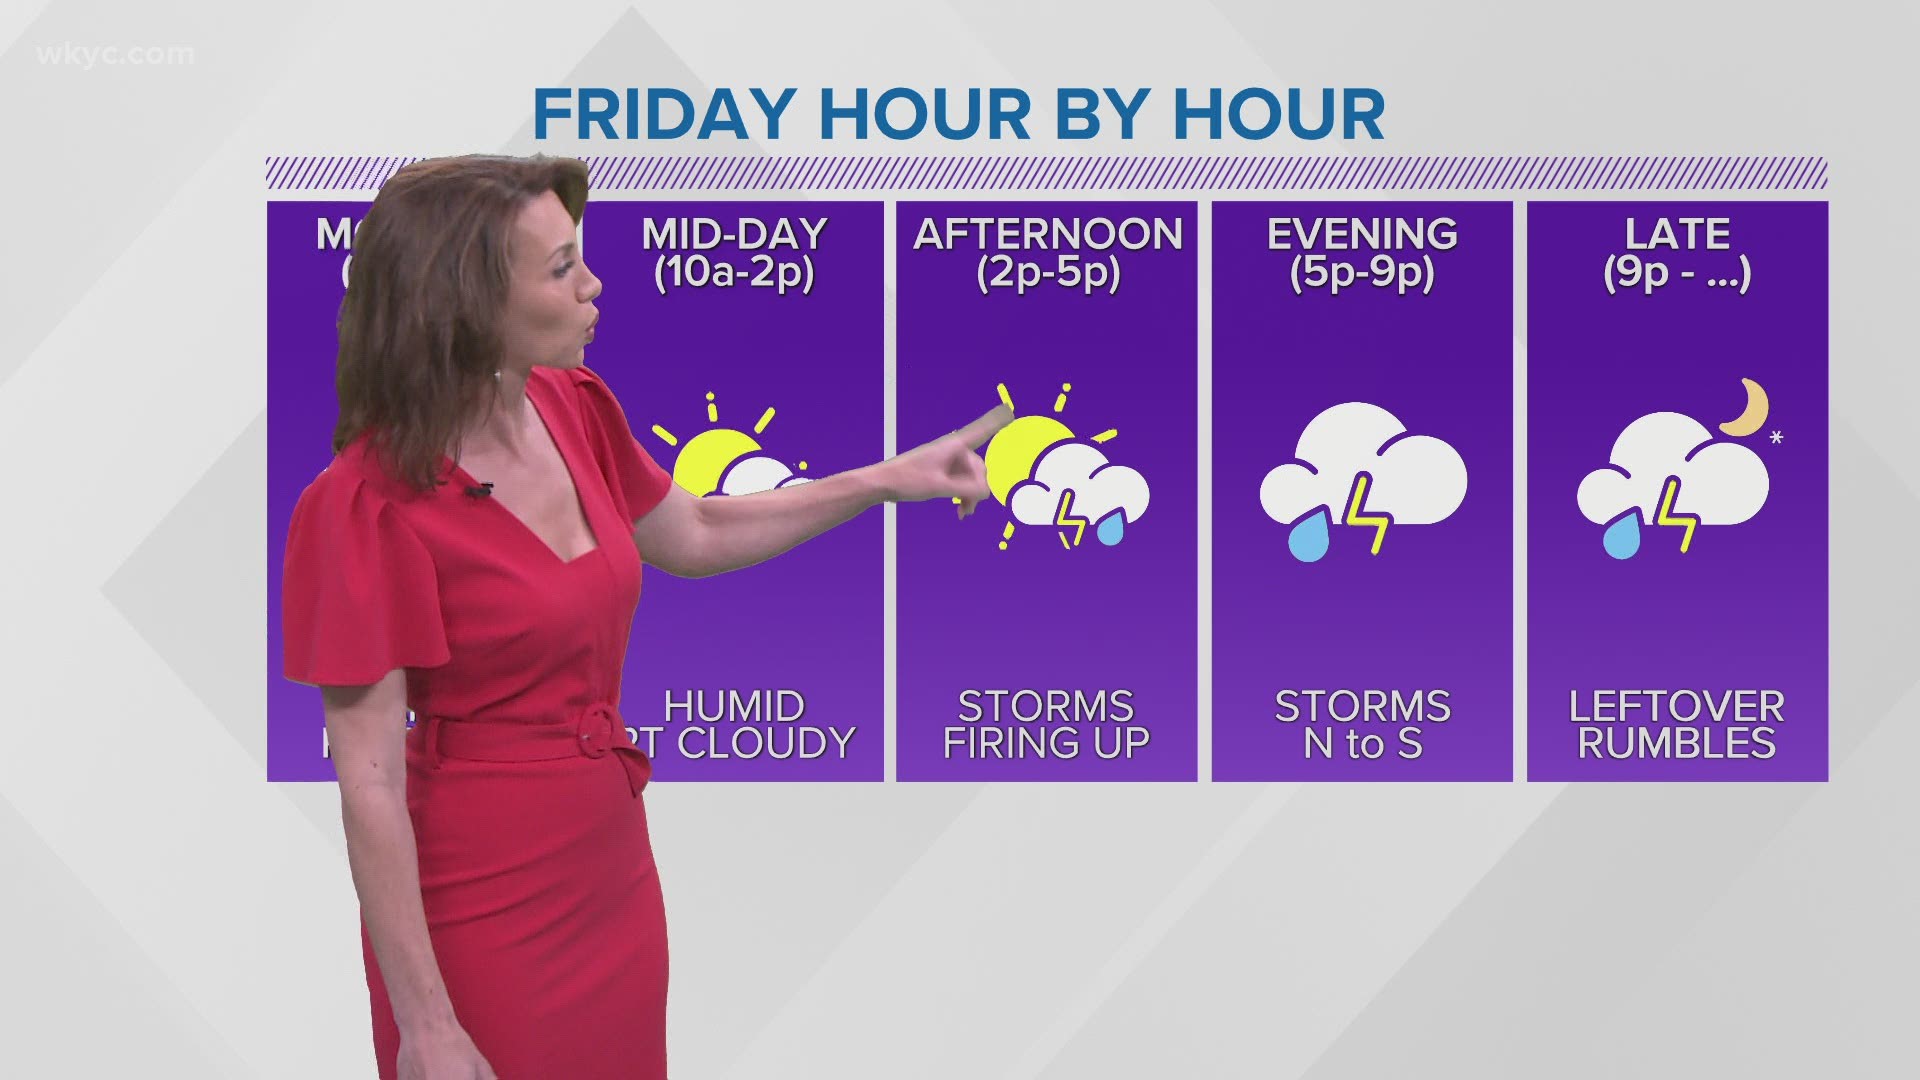 Rain is on the way for Northeast Ohio. Betsy Kling has what to expect over night and into the morning in her extended forecast.